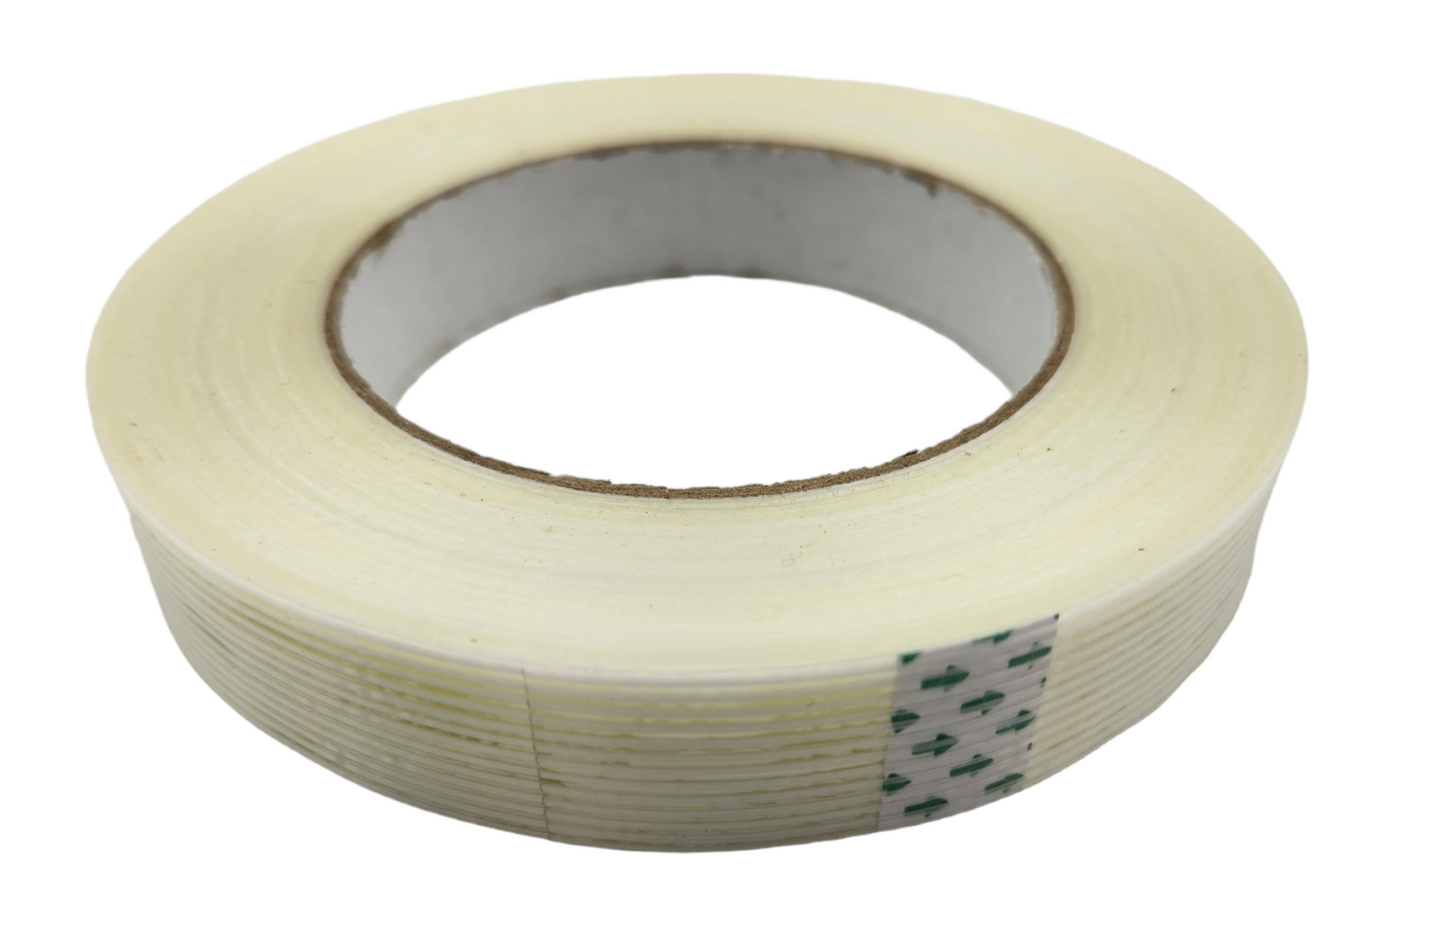 FIVESTAR BATTERY STRAPPING TAPE WITH FIBERS 50M LONG (CLEAR)